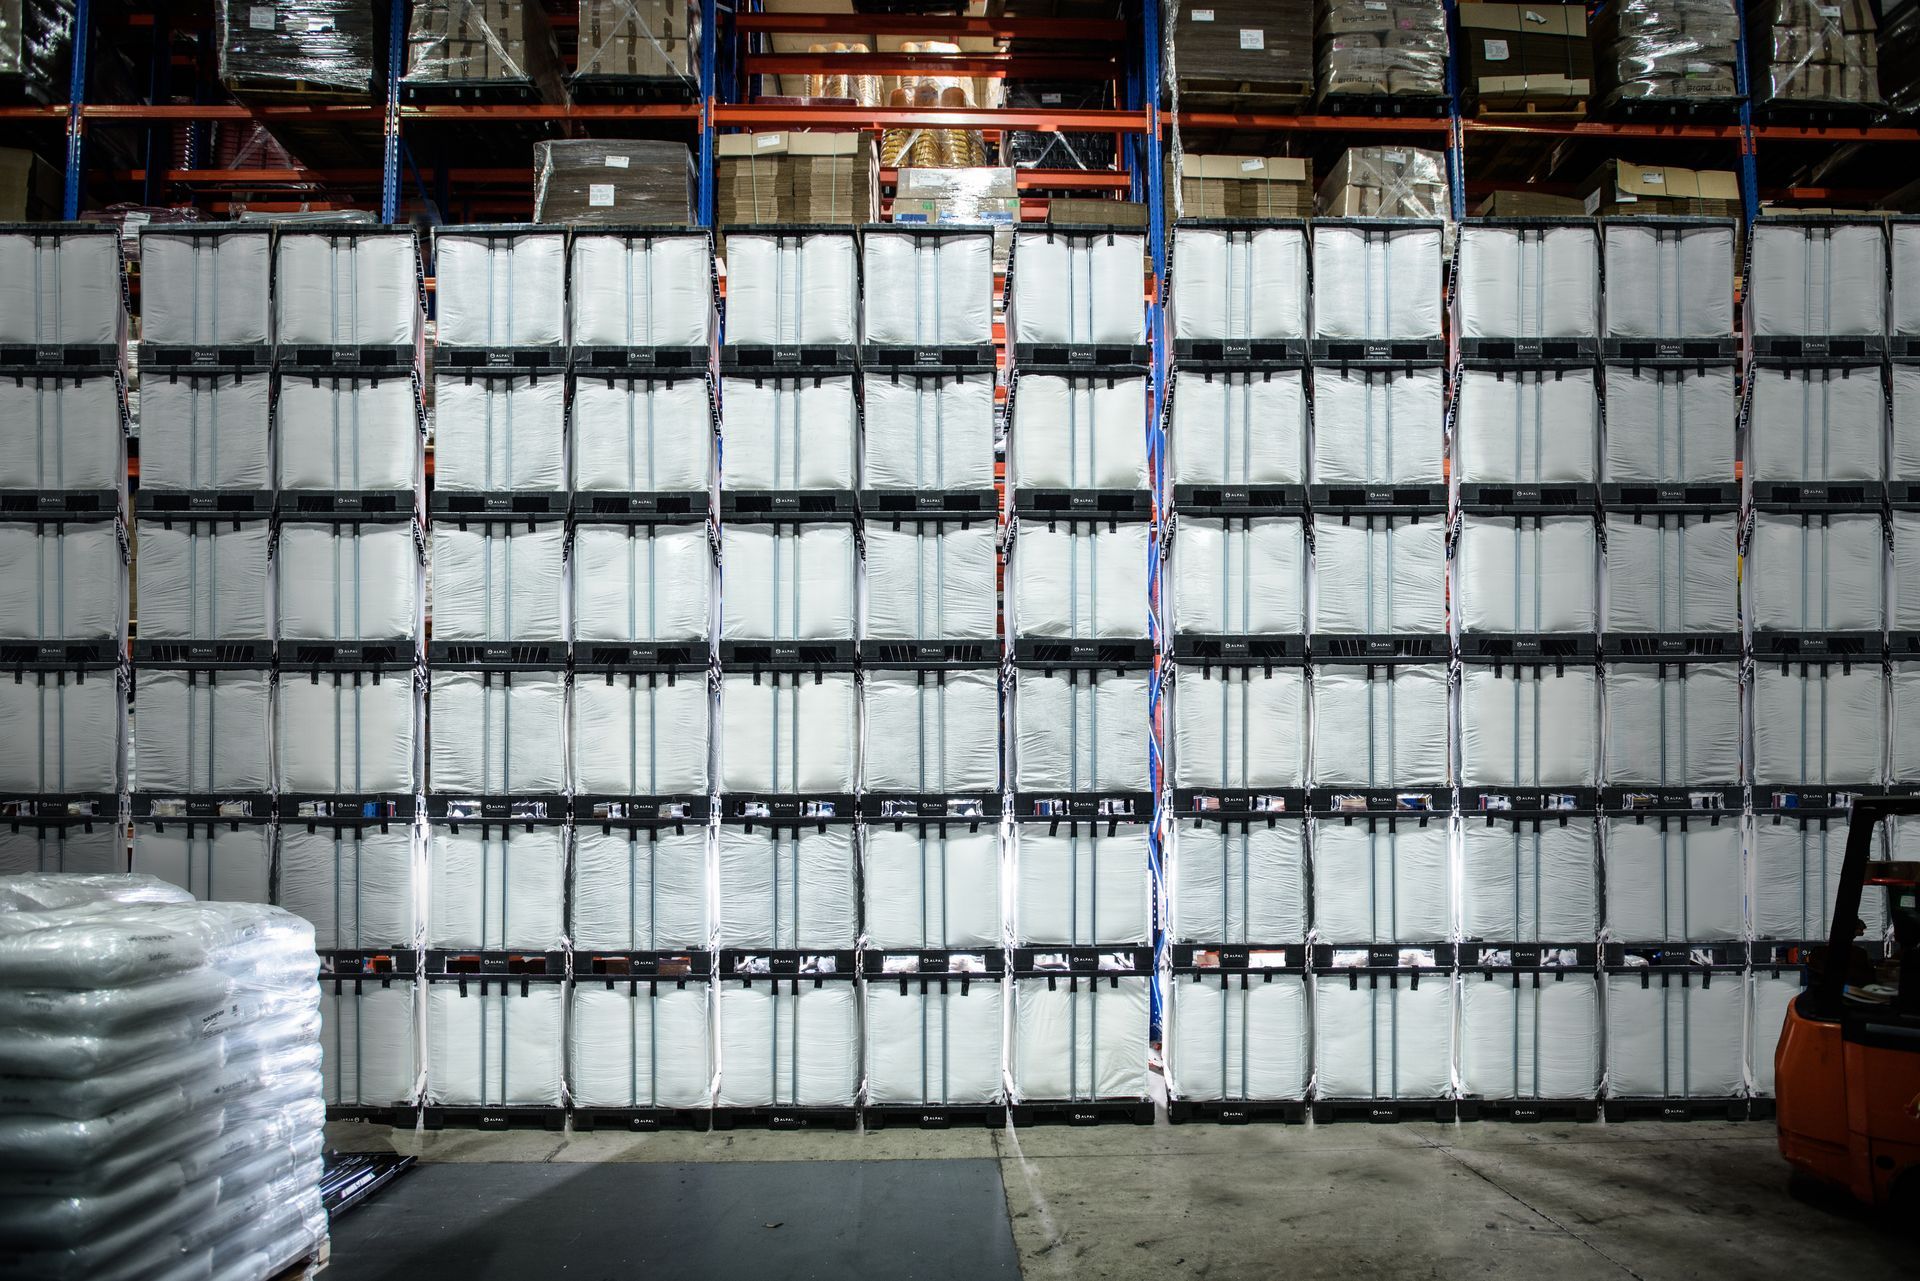 Neatly stacked plastic bulk containers